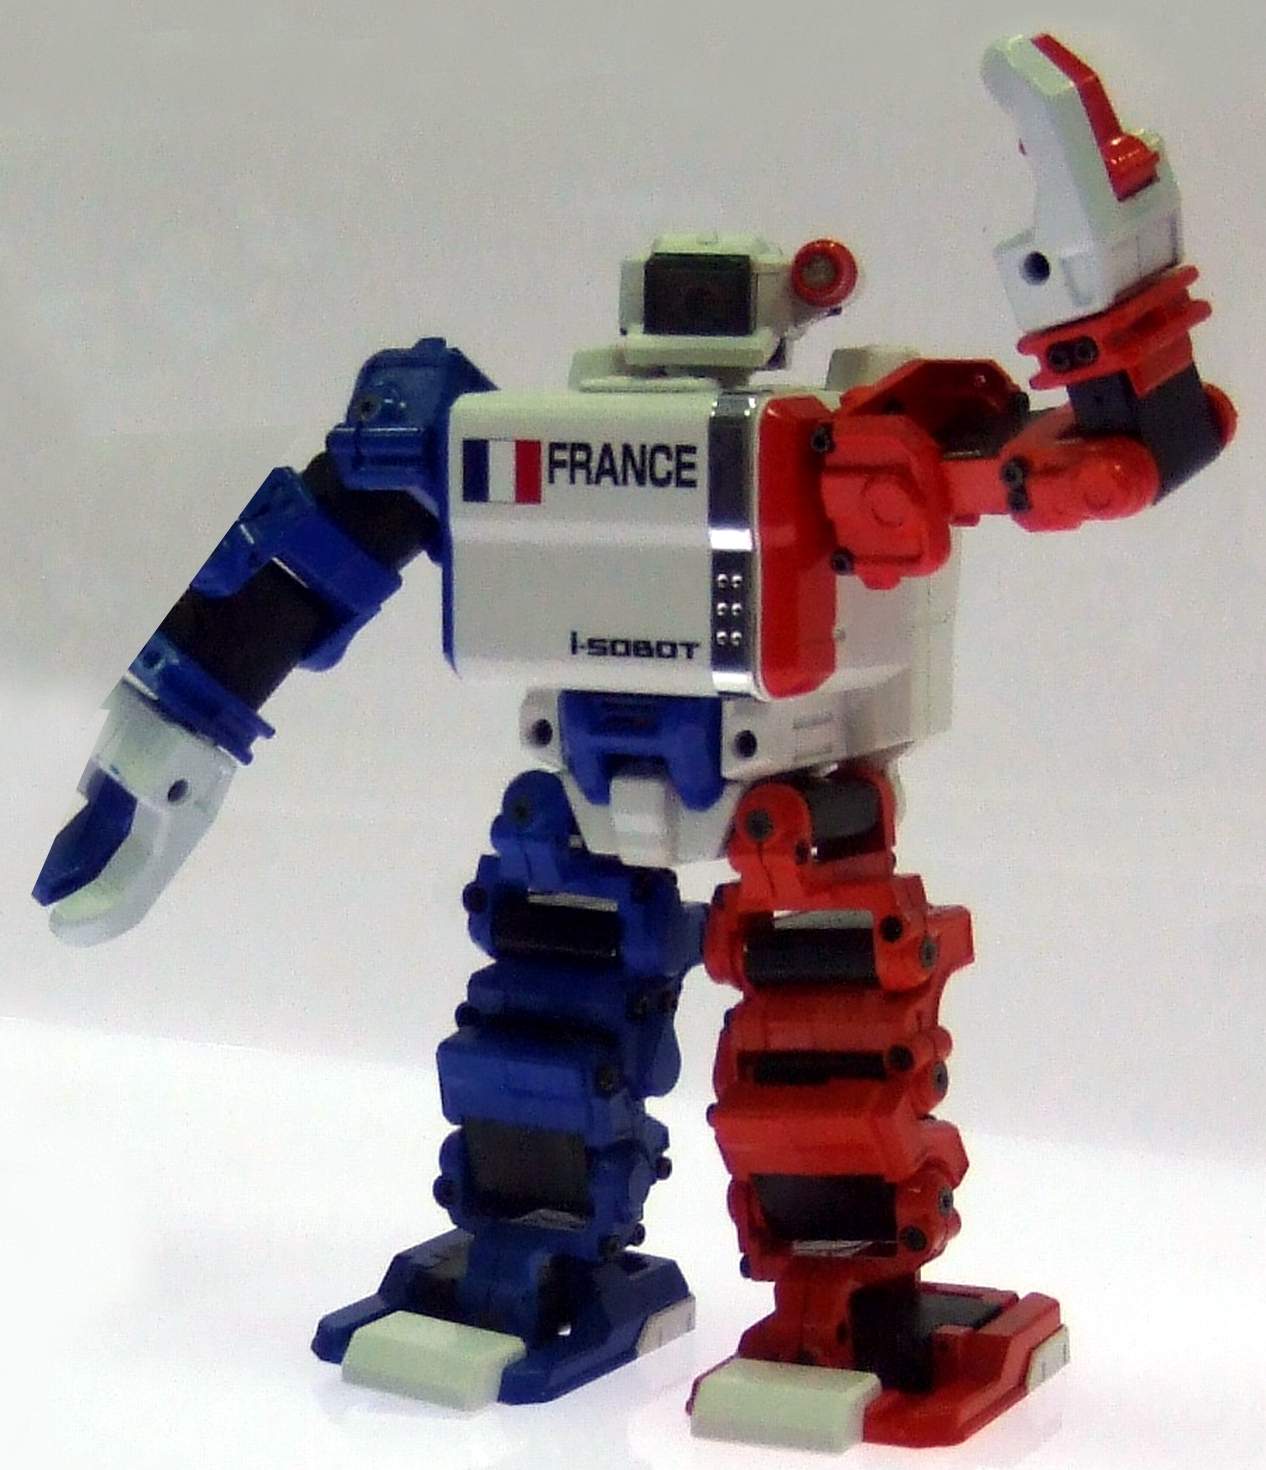 i-sobot Small Robots - The Old Robot's Web Site